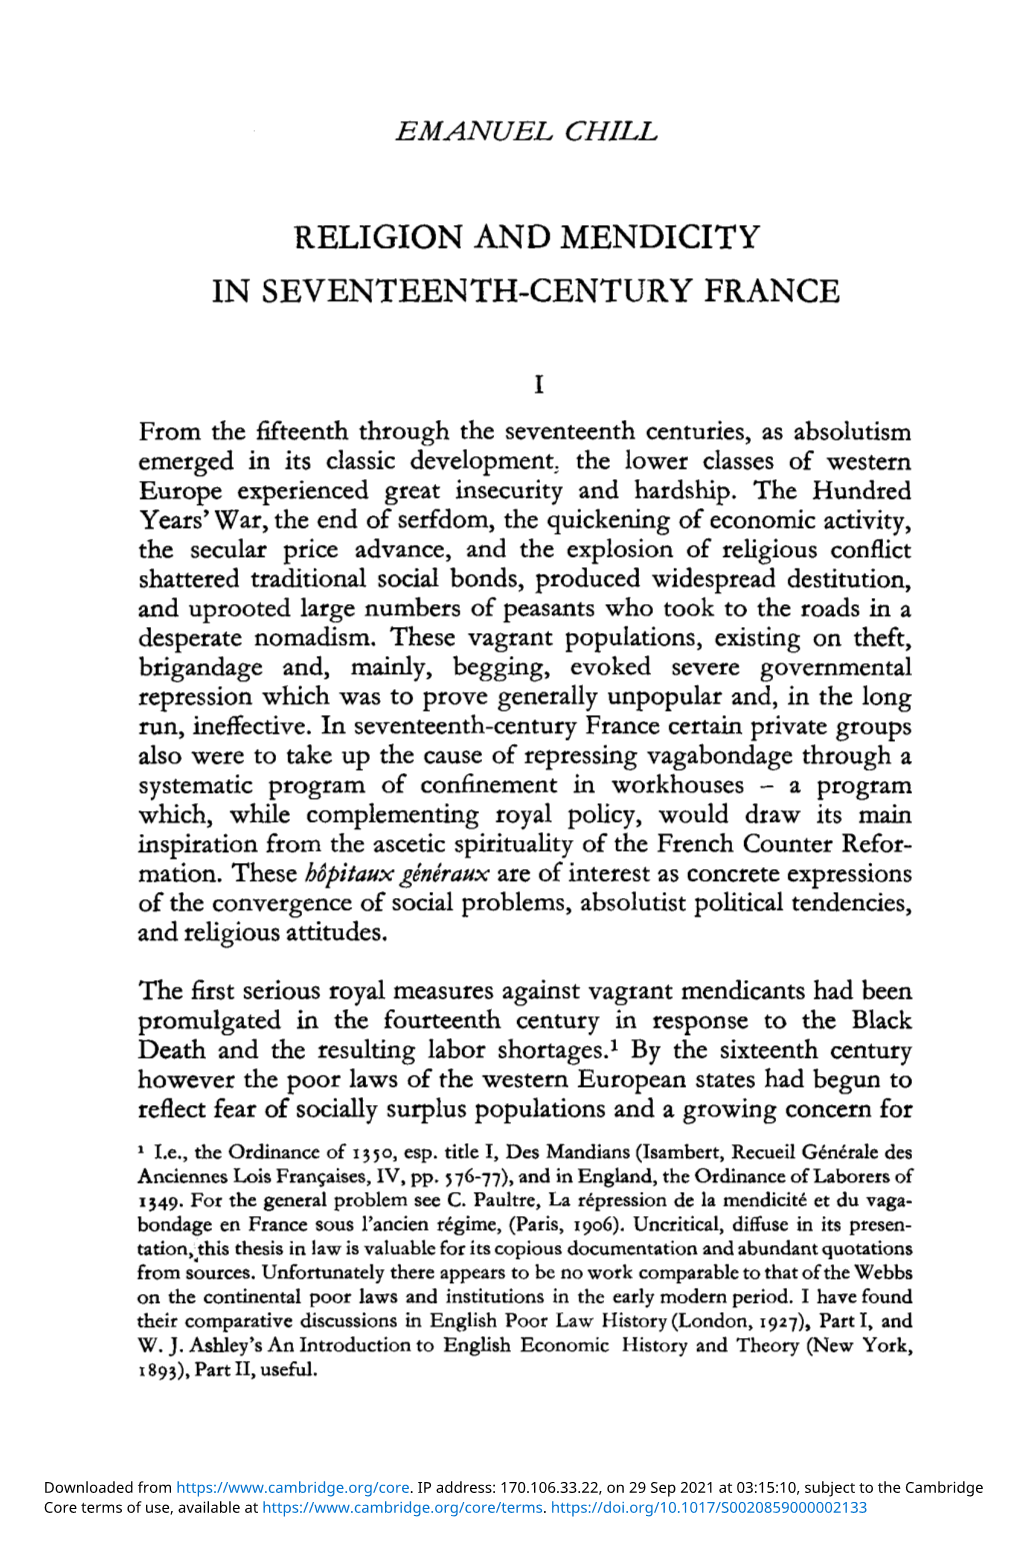 Religion and Mendicity in Seventeenth-Century France